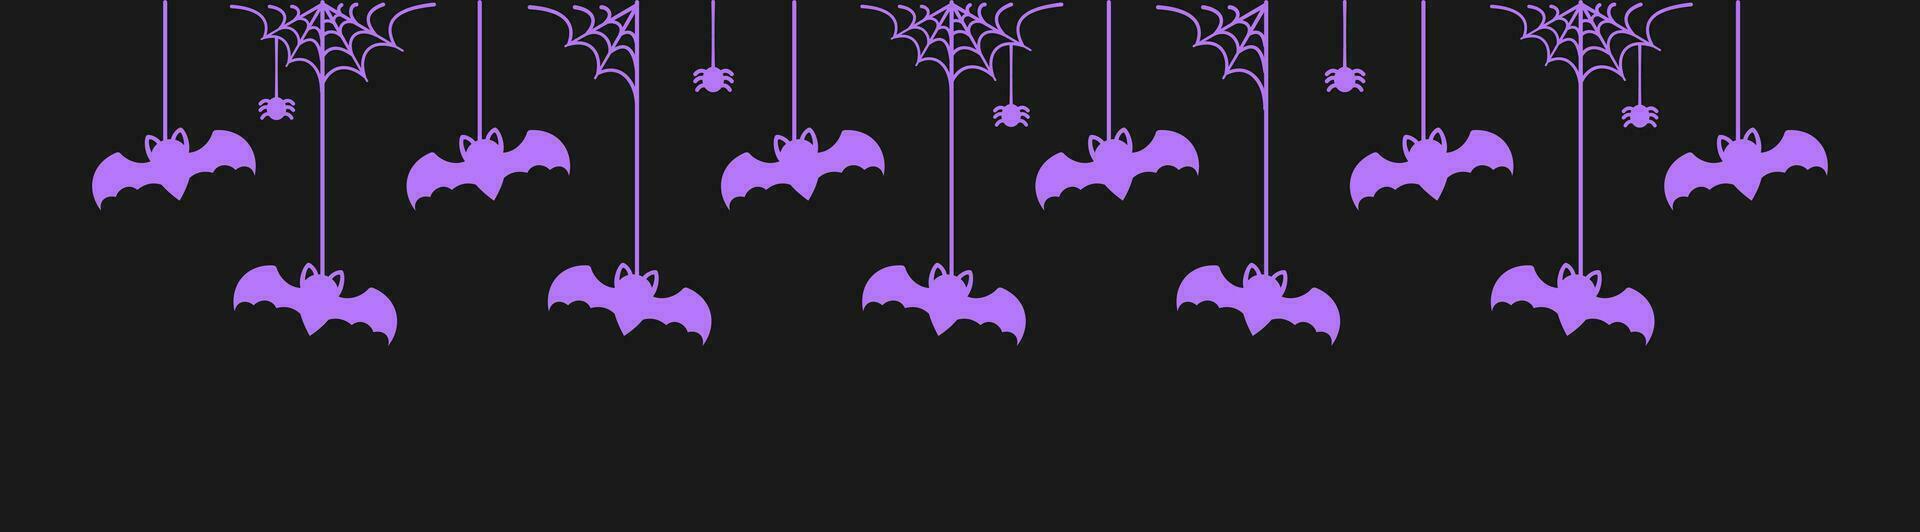 Happy Halloween banner border with bats hanging from spider webs. Spooky Ornaments Decoration Vector illustration, trick or treat party invitation